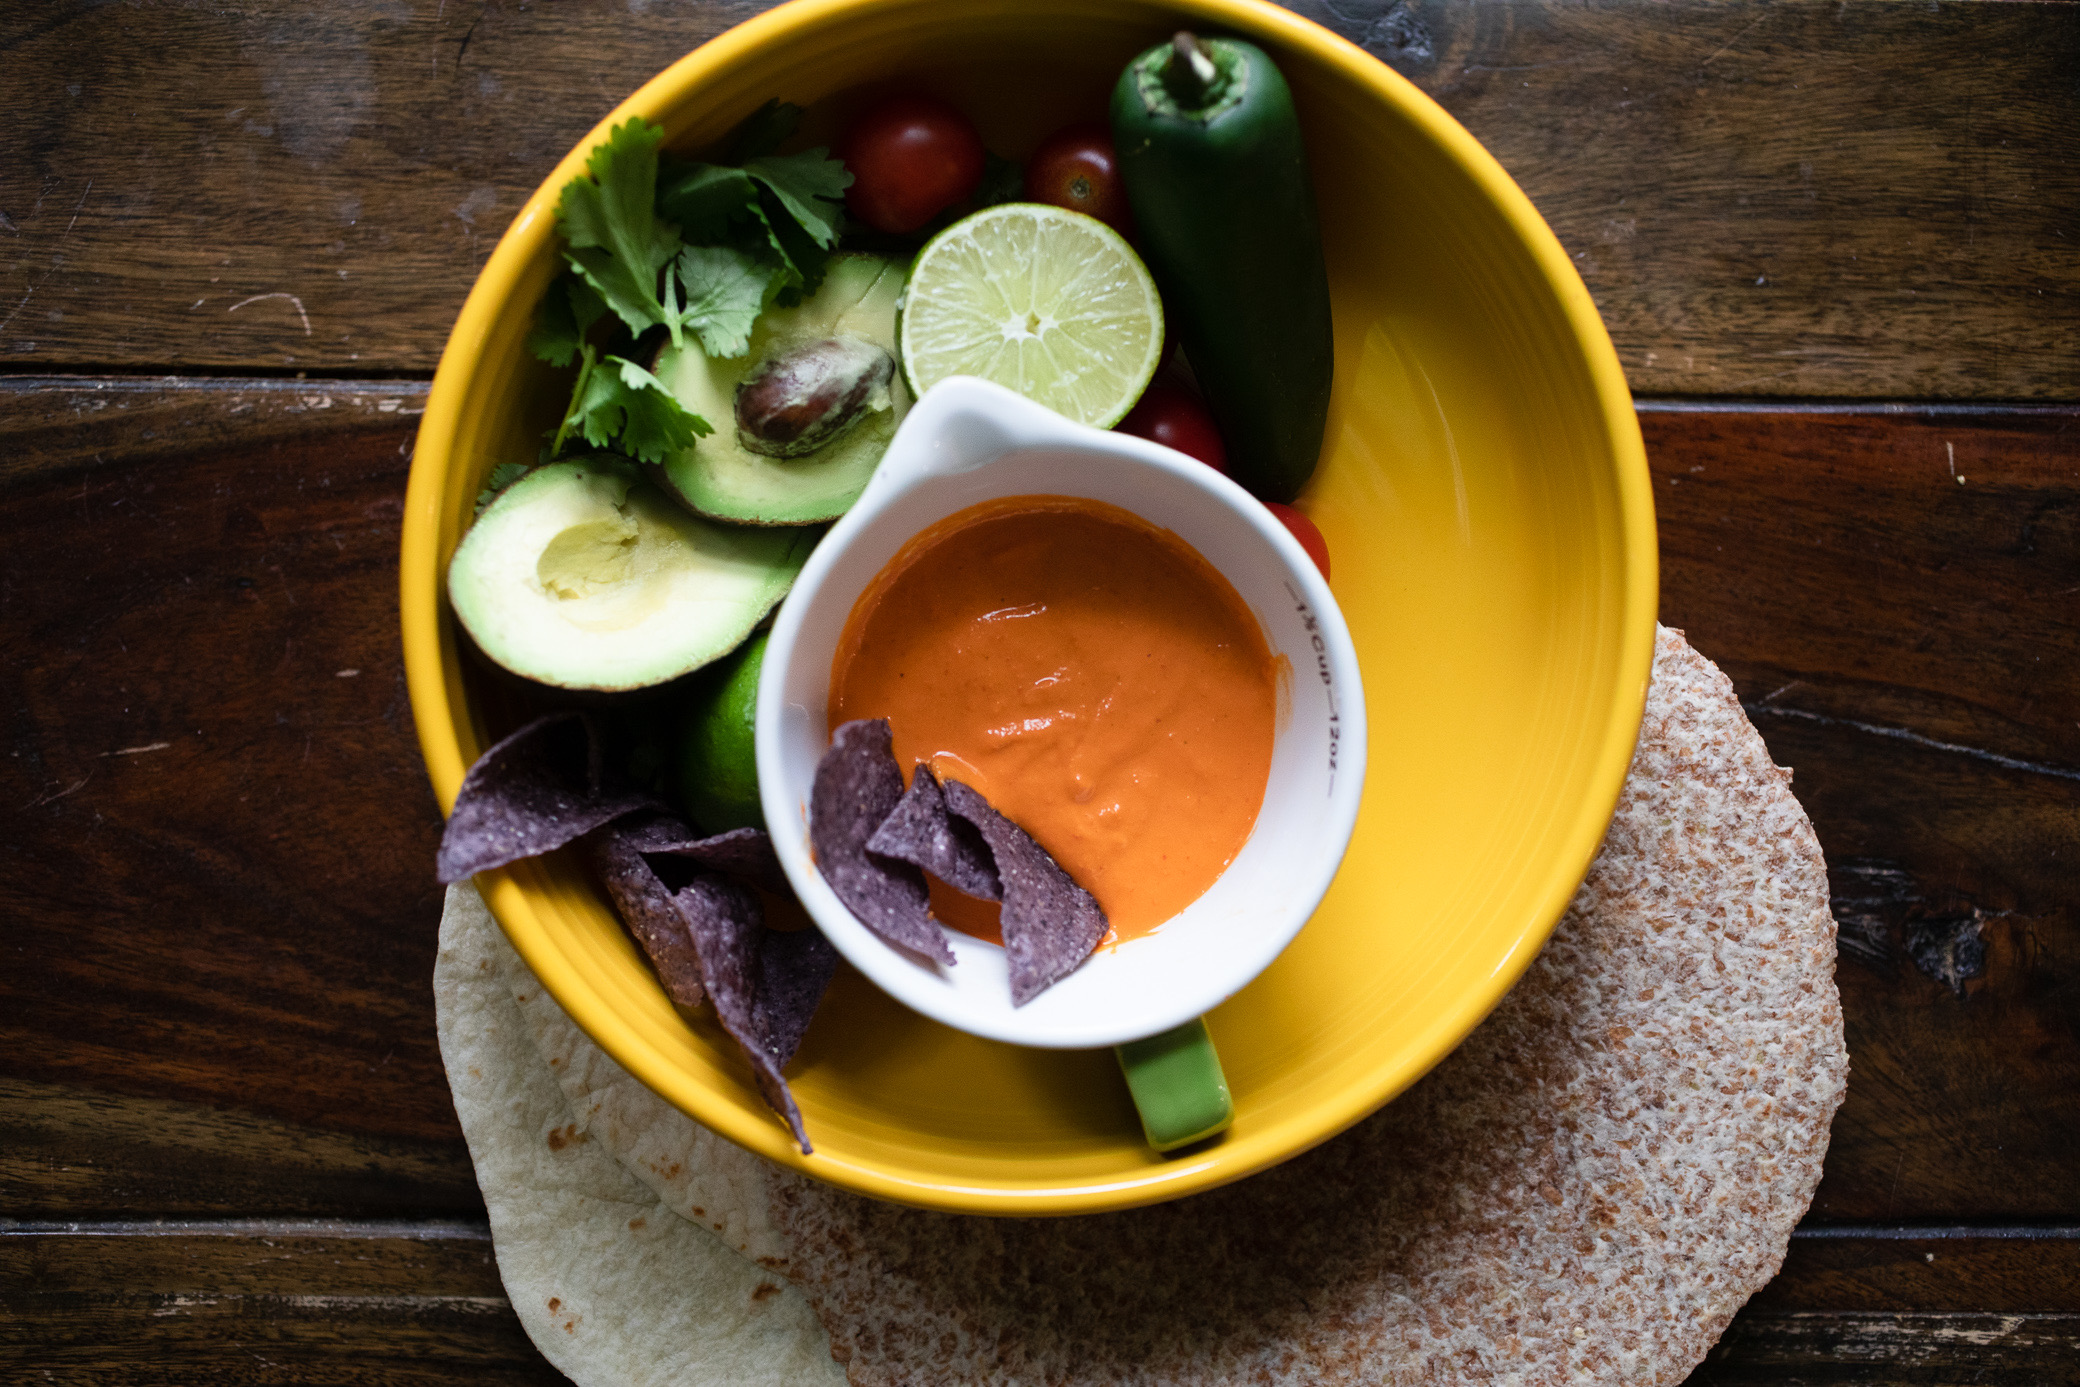 Featured image for “The Raw & The Cooked: Red Pepper Cashew Queso Two Ways”